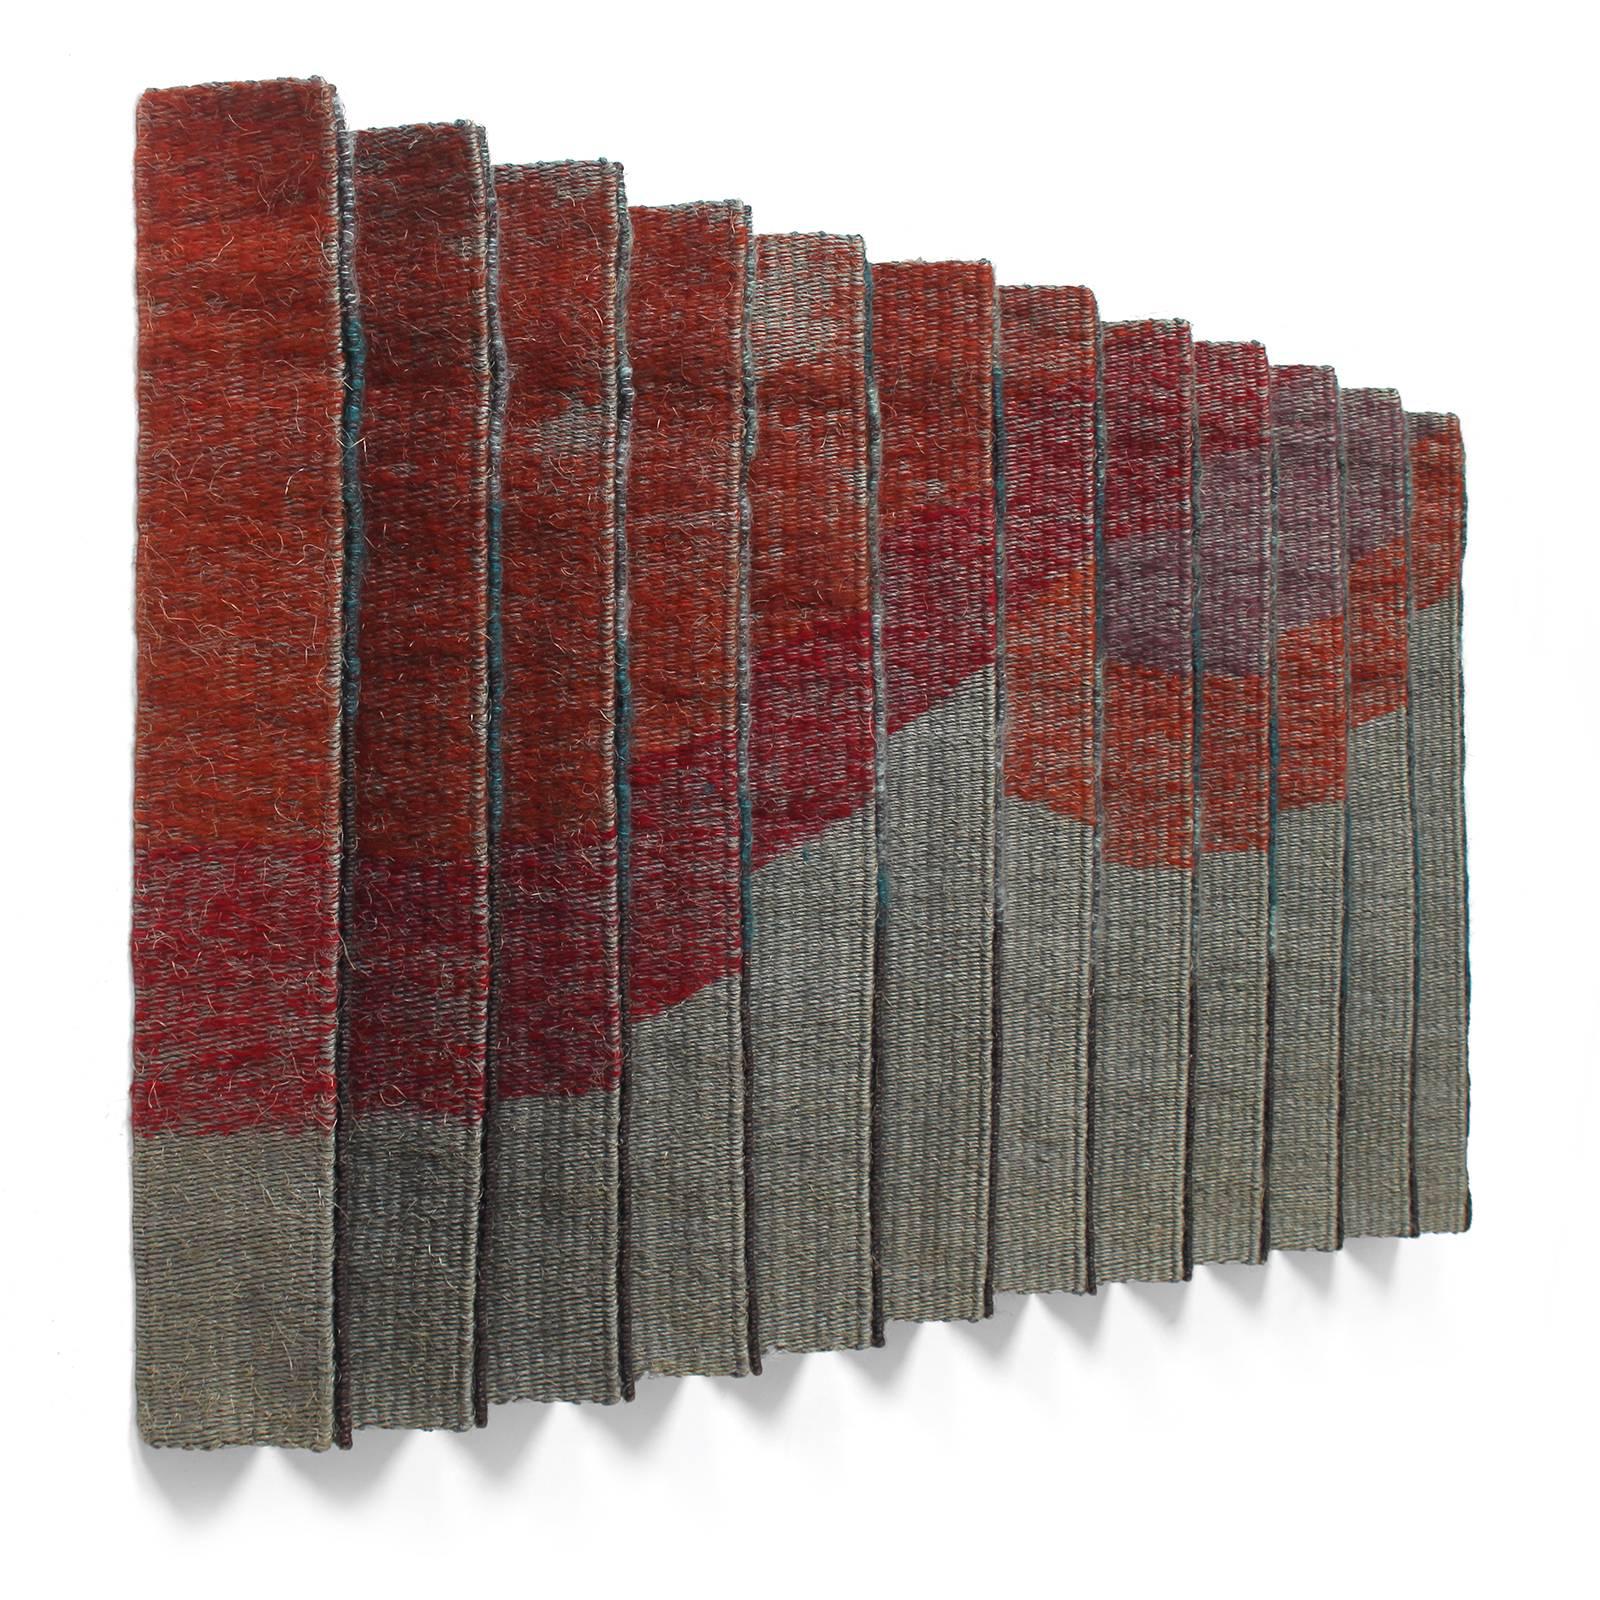 A unique wall hanging fashioned of conjoined and pleated hand woven wool panels in abstracted patterns in tones of black, gray and red.